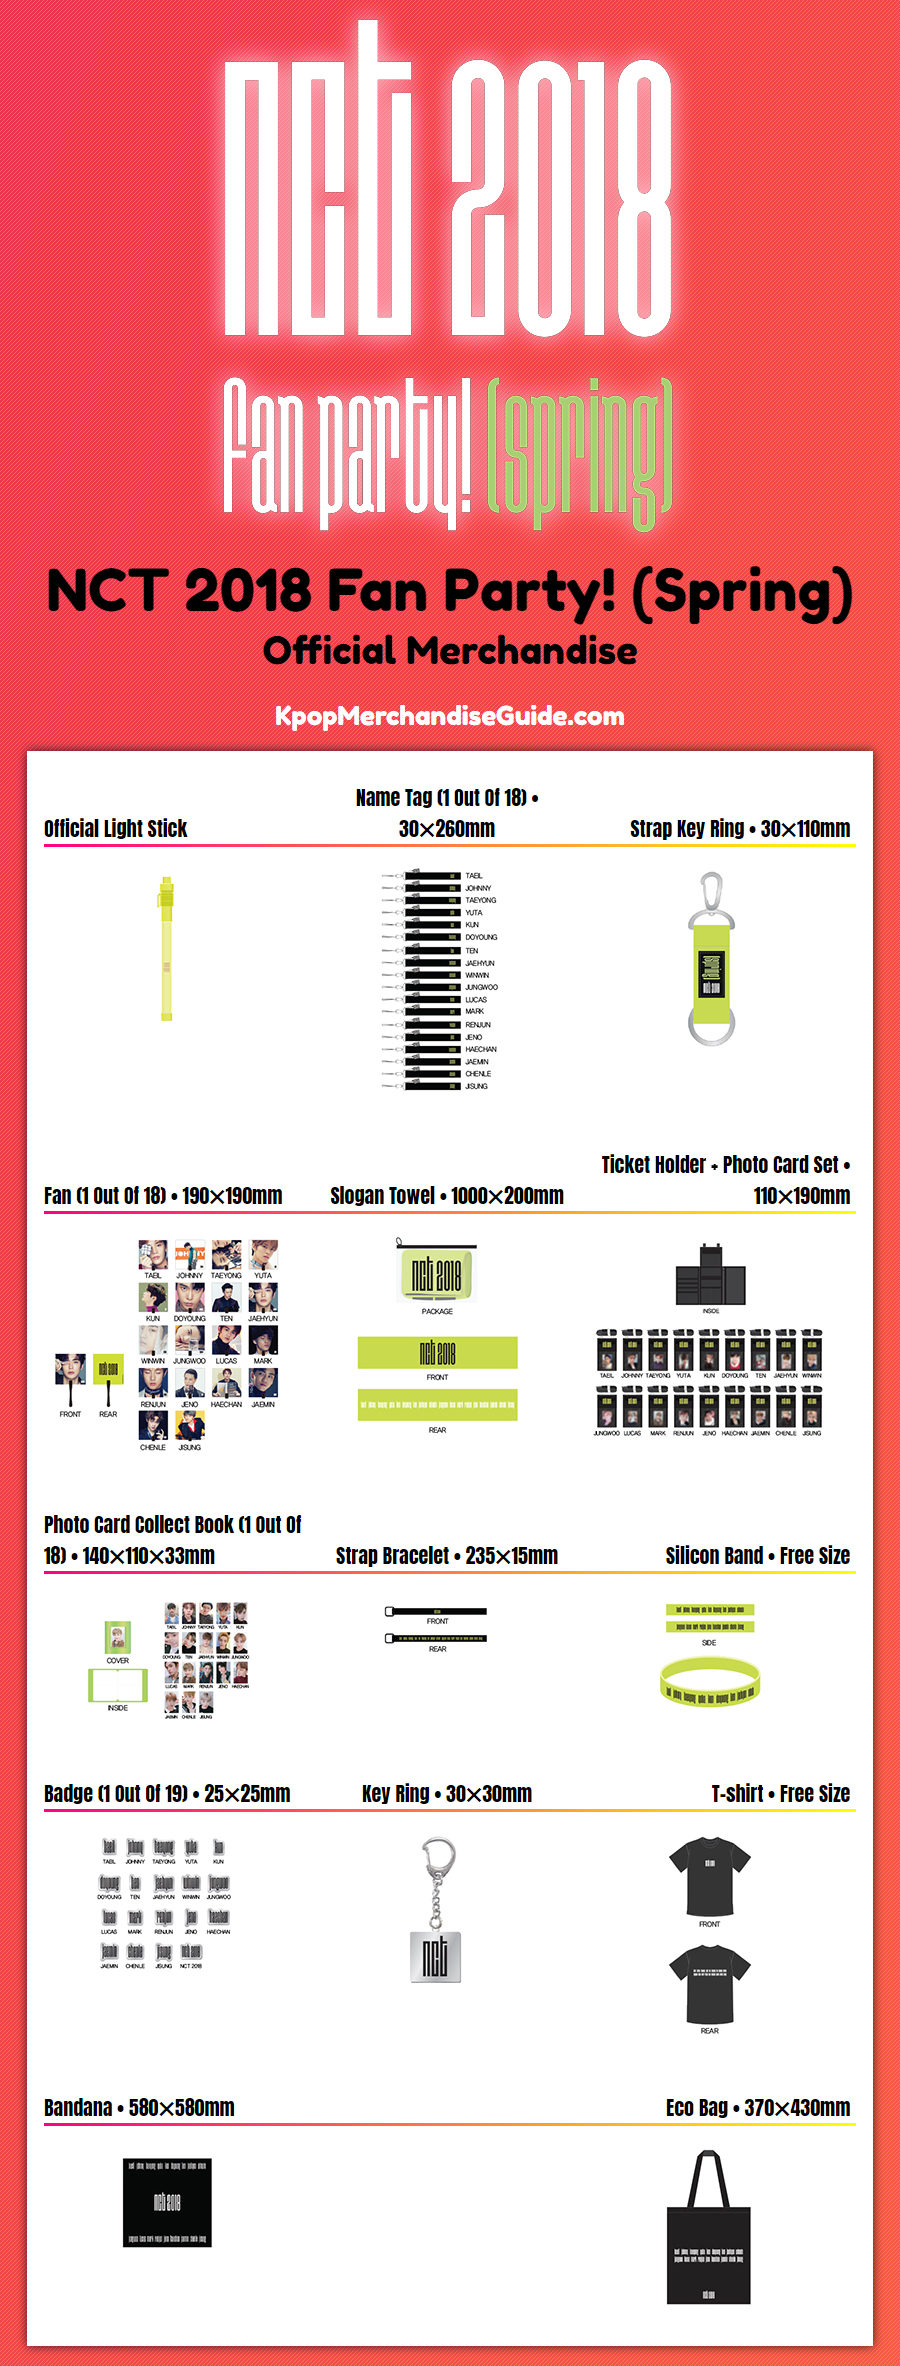 NCT 2018 Fan Party! (Spring) Merchandise